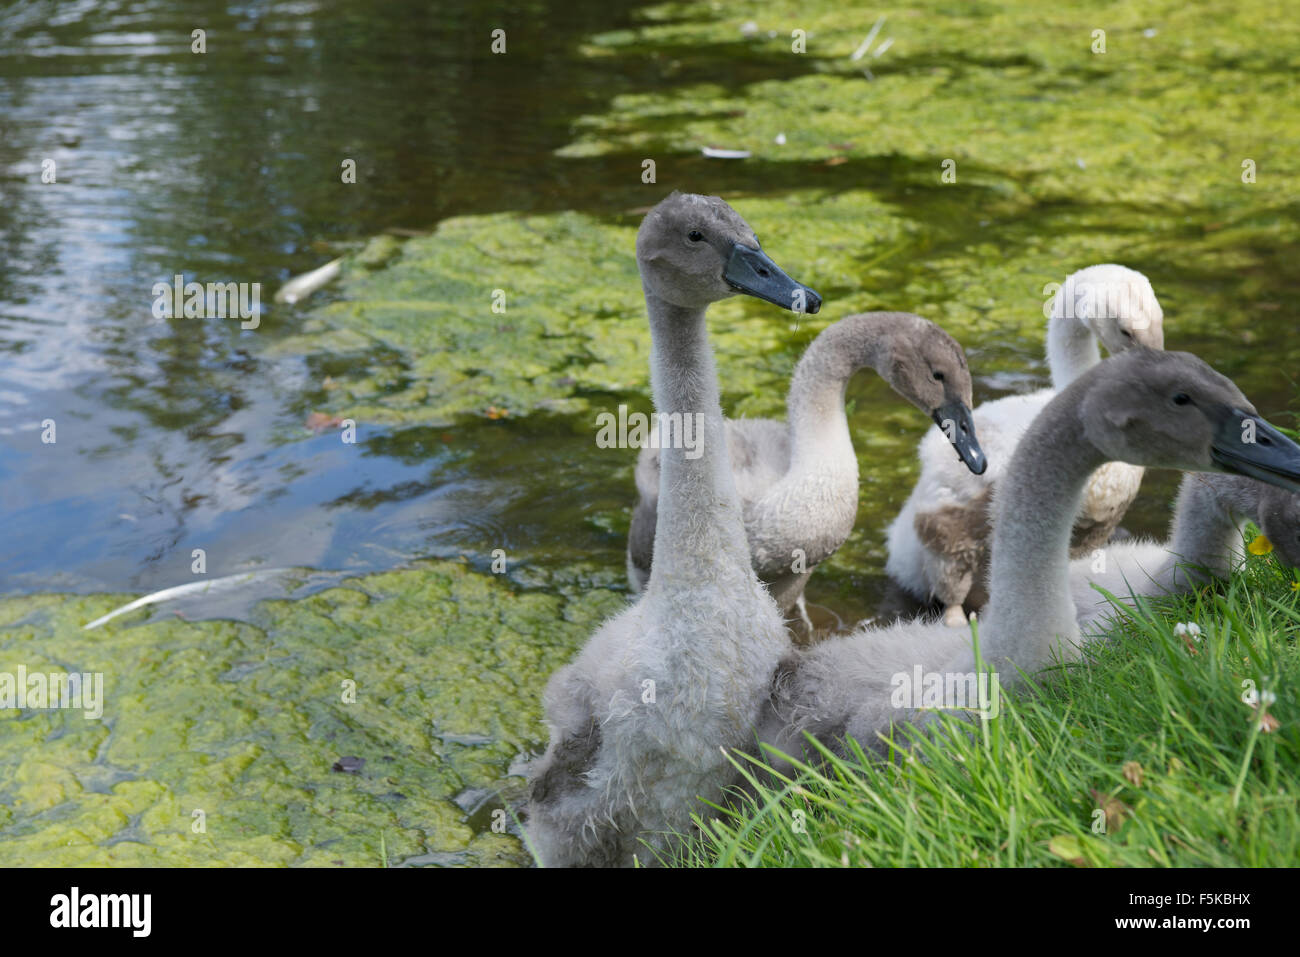 Signets at the Waterside. Stock Photo